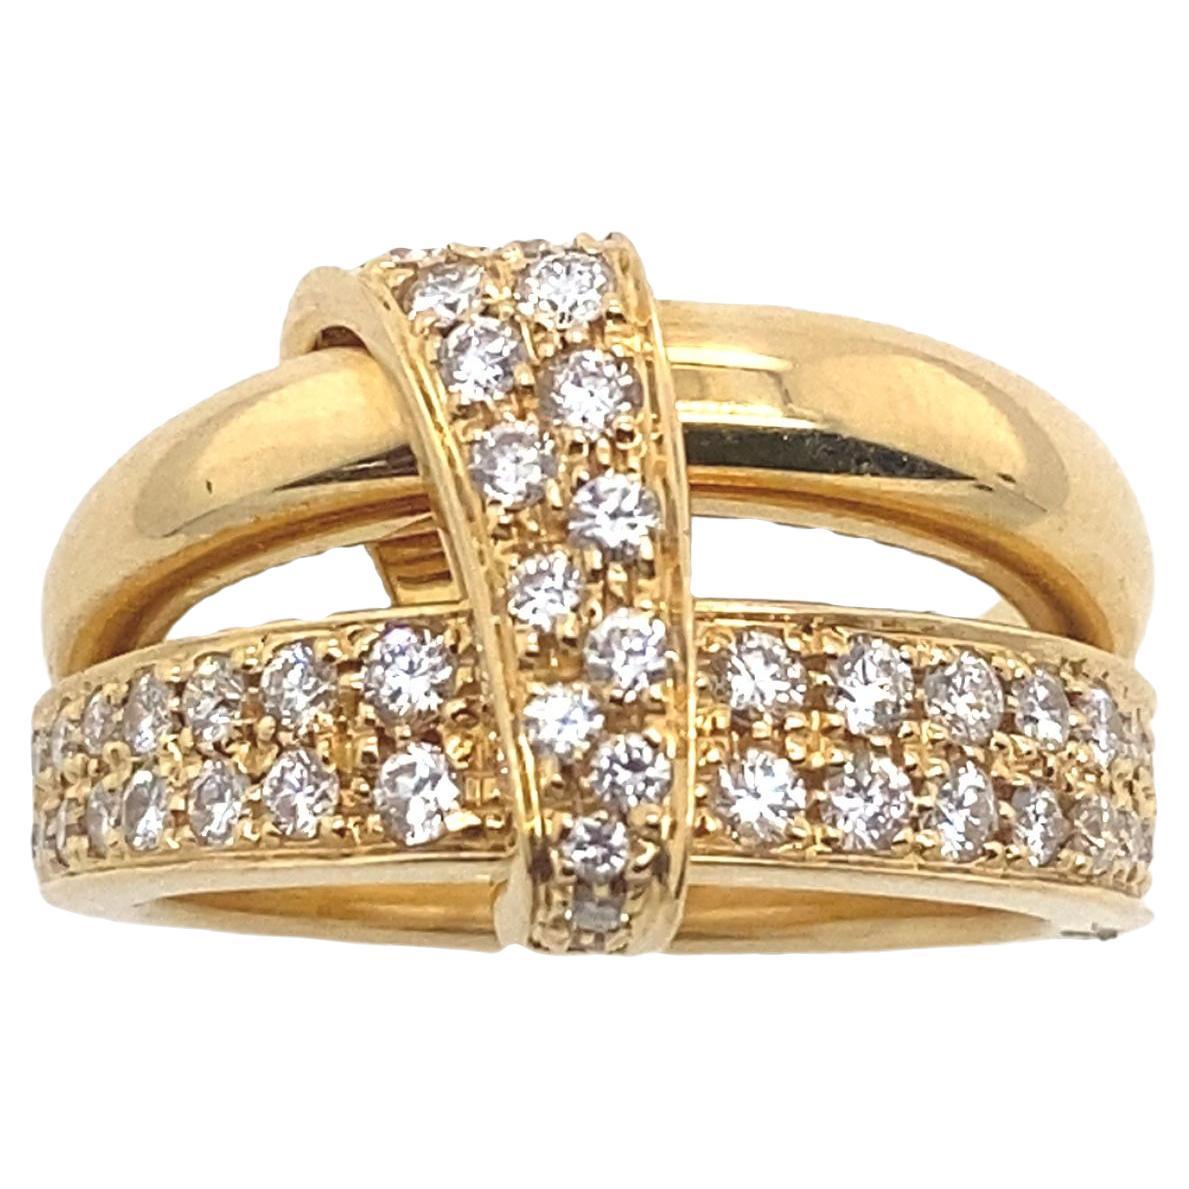 Asprey Dimond 2-Band Ring, Set With 0.65ct Diamonds In 18ct Yellow Gold For Sale